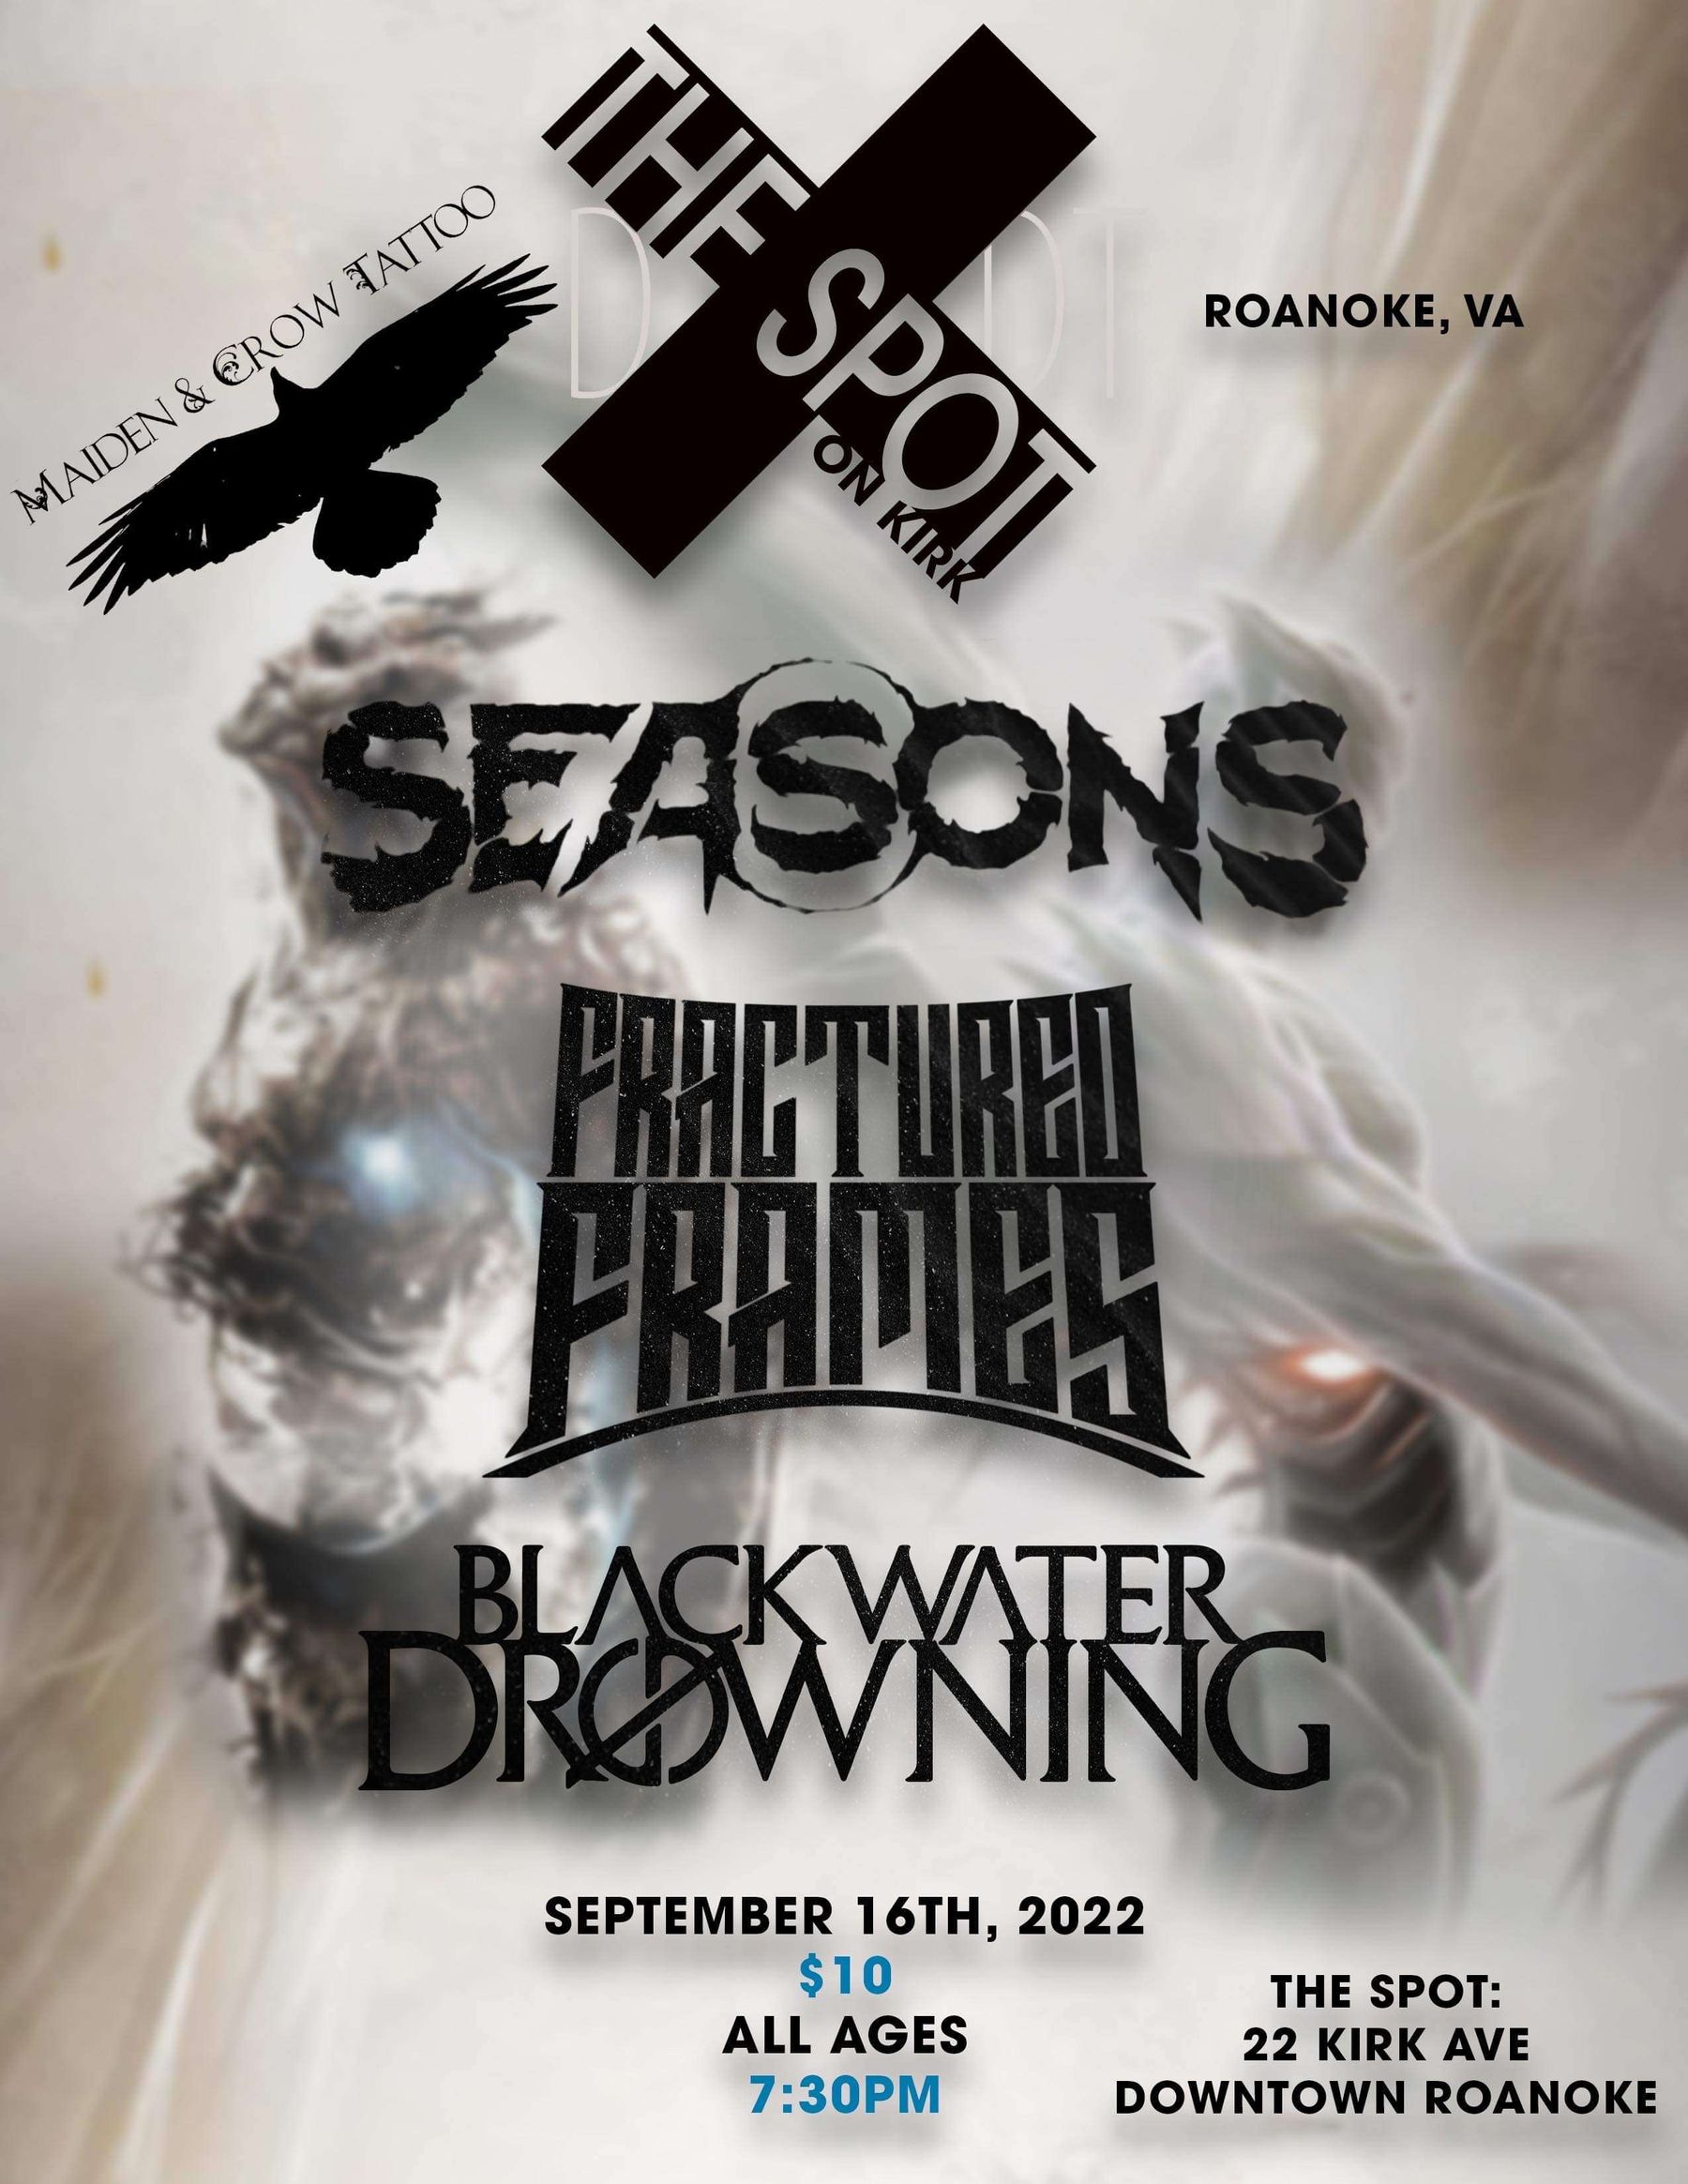 Maiden & Crow Seasons / Fractured Frames / Blackwater Drowning